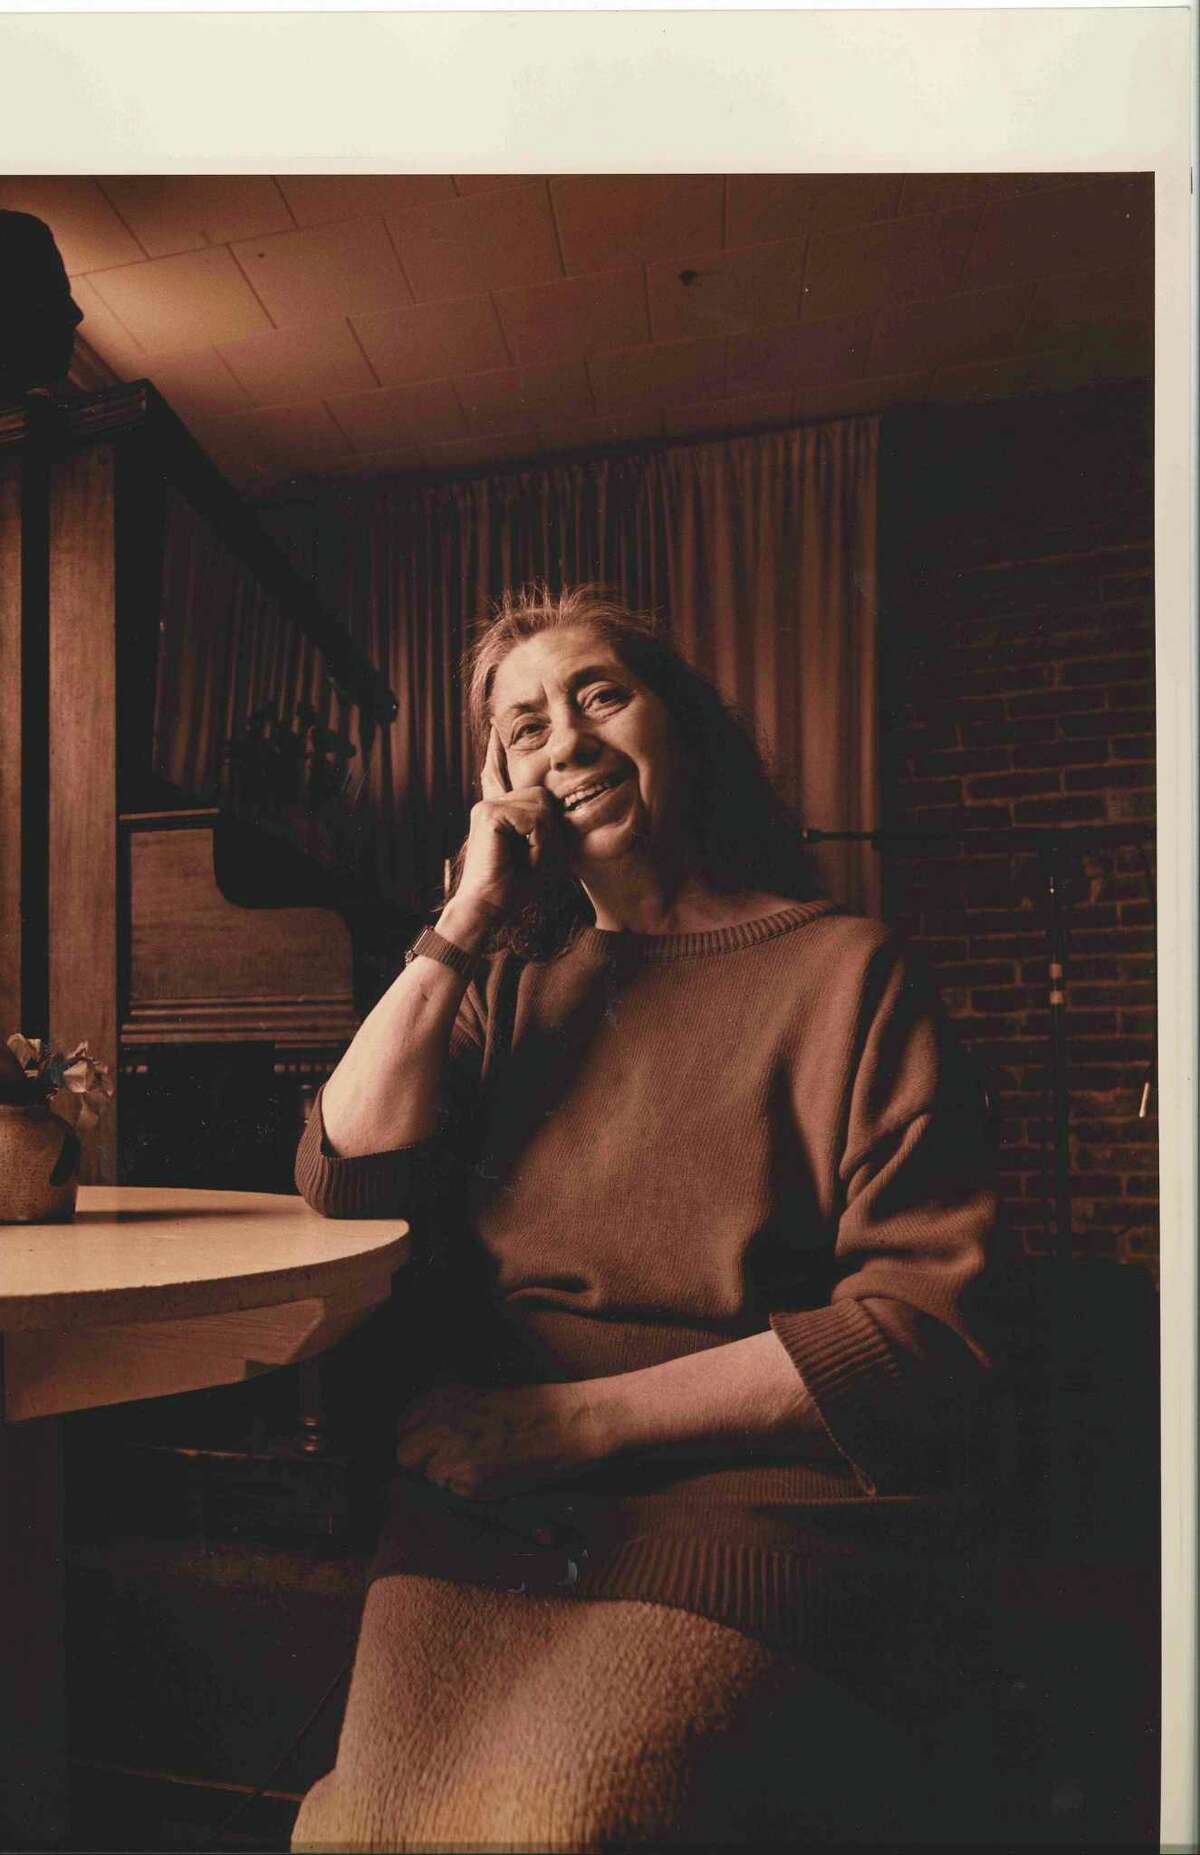 Lena Spencer, founder of Caffe Lena, is among the 2020 inductees of the Eddies Music Hall of Fame.